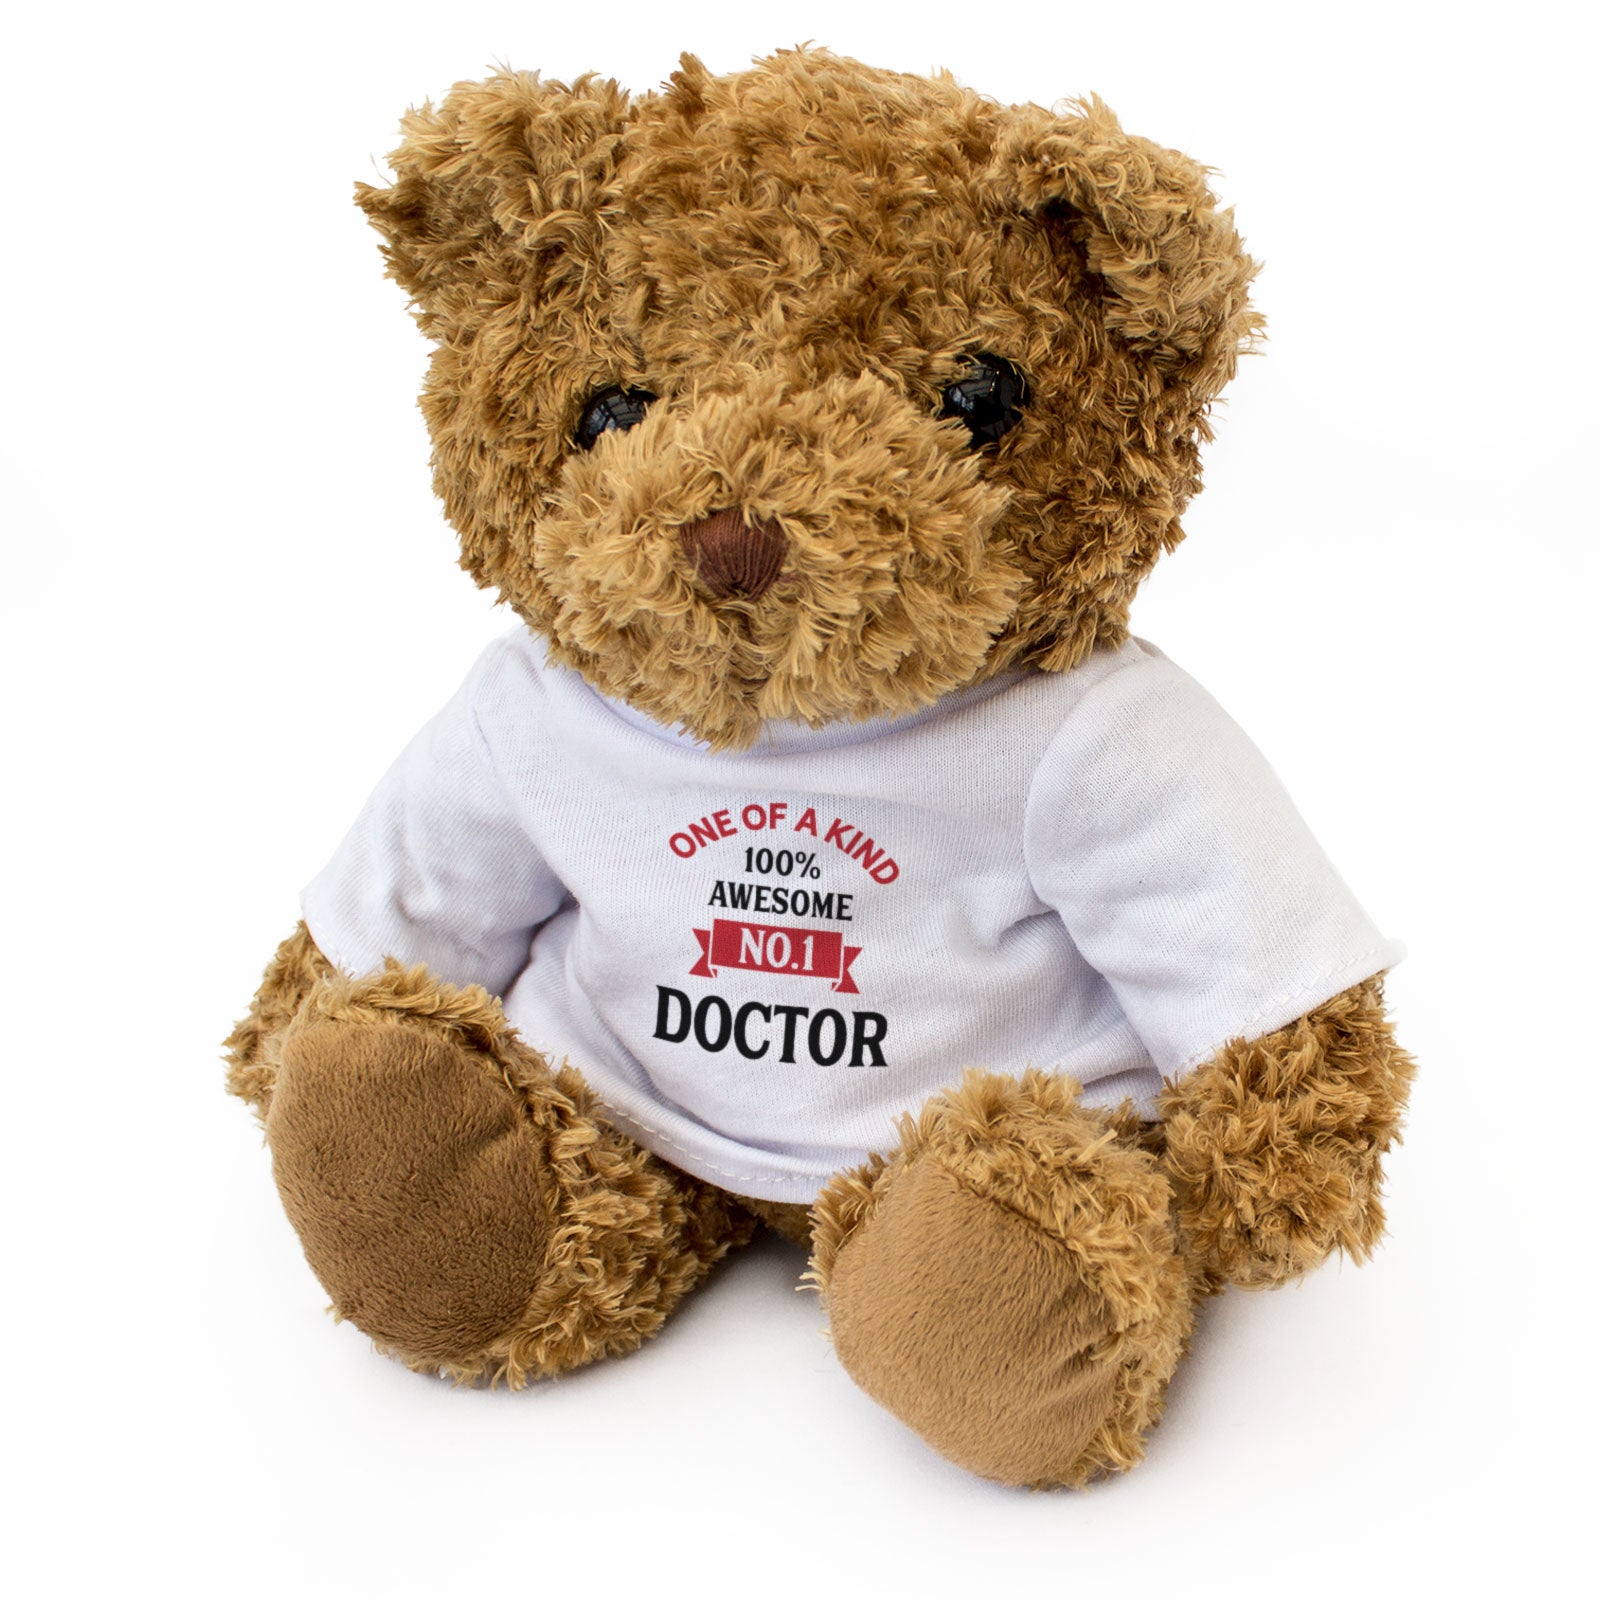 NUMBER ONE DOCTOR - Teddy Bear - No.1